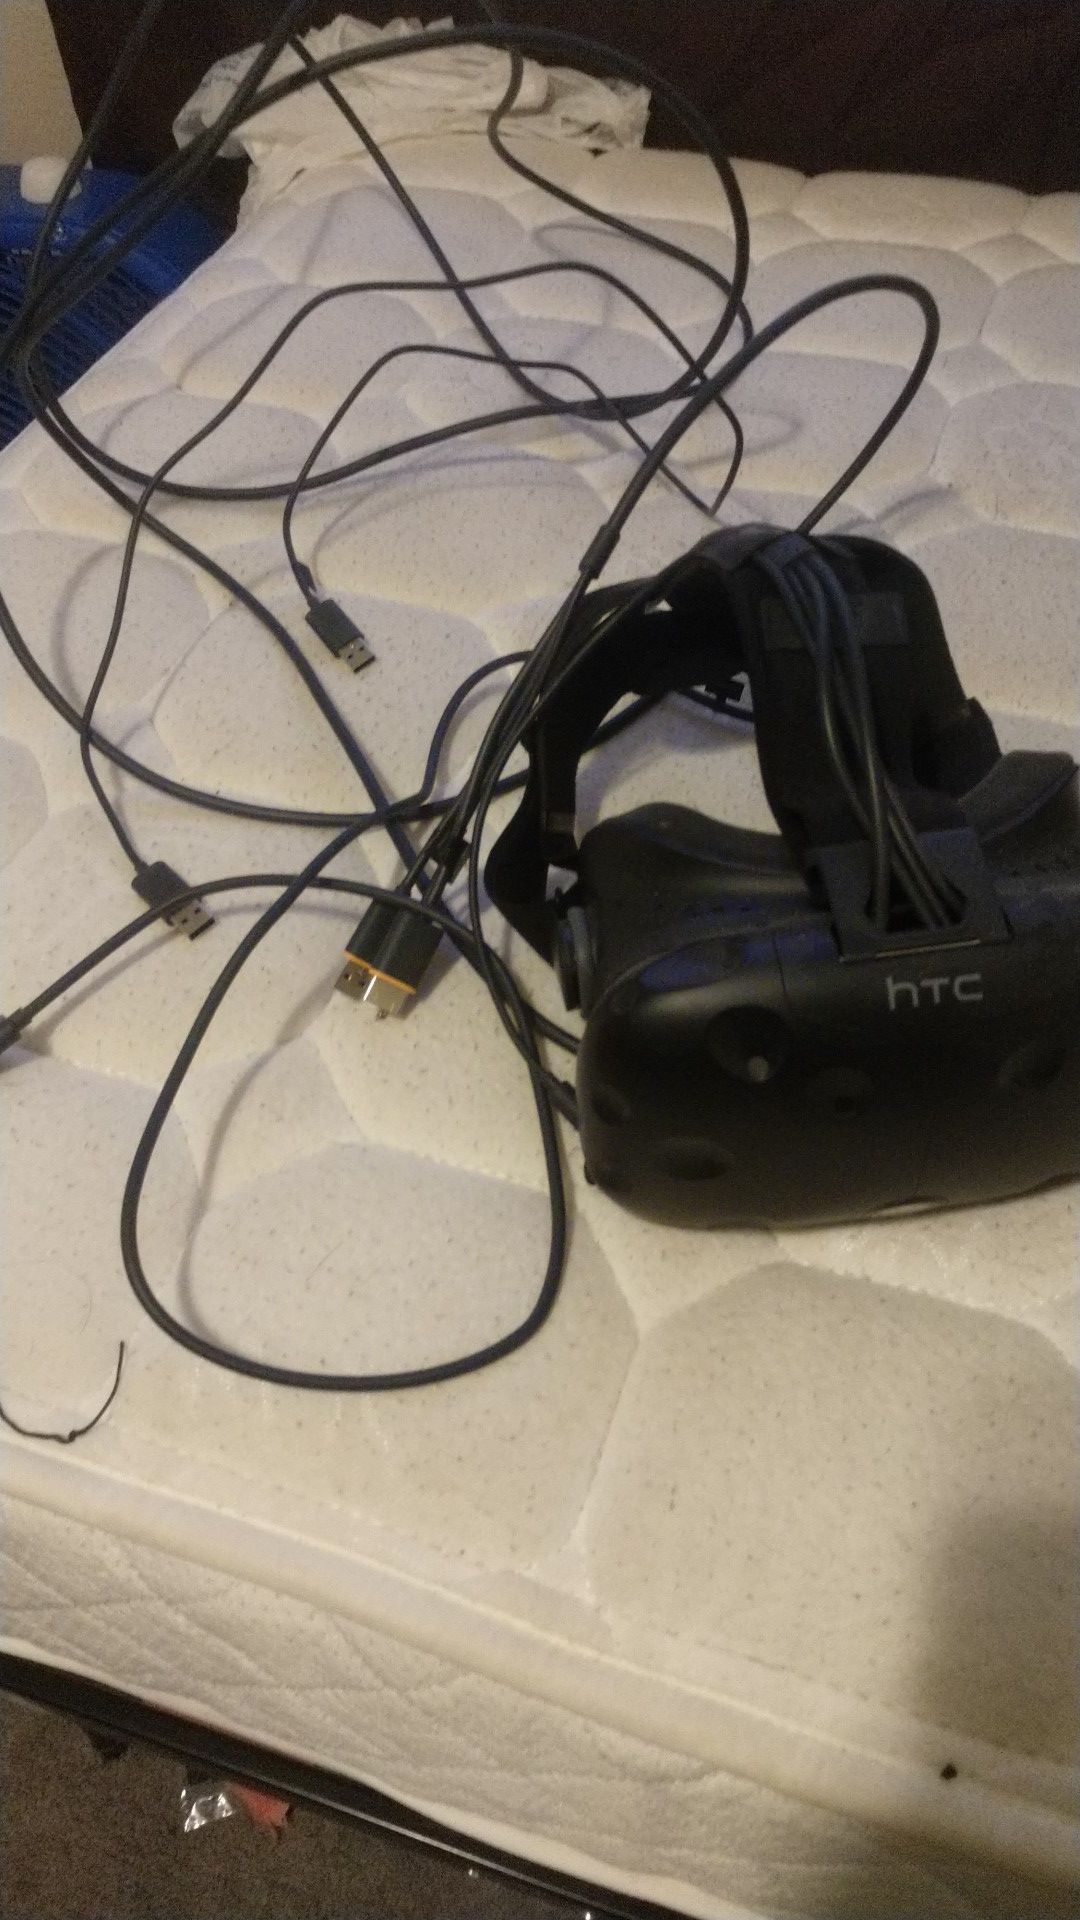 Htc vive barely used